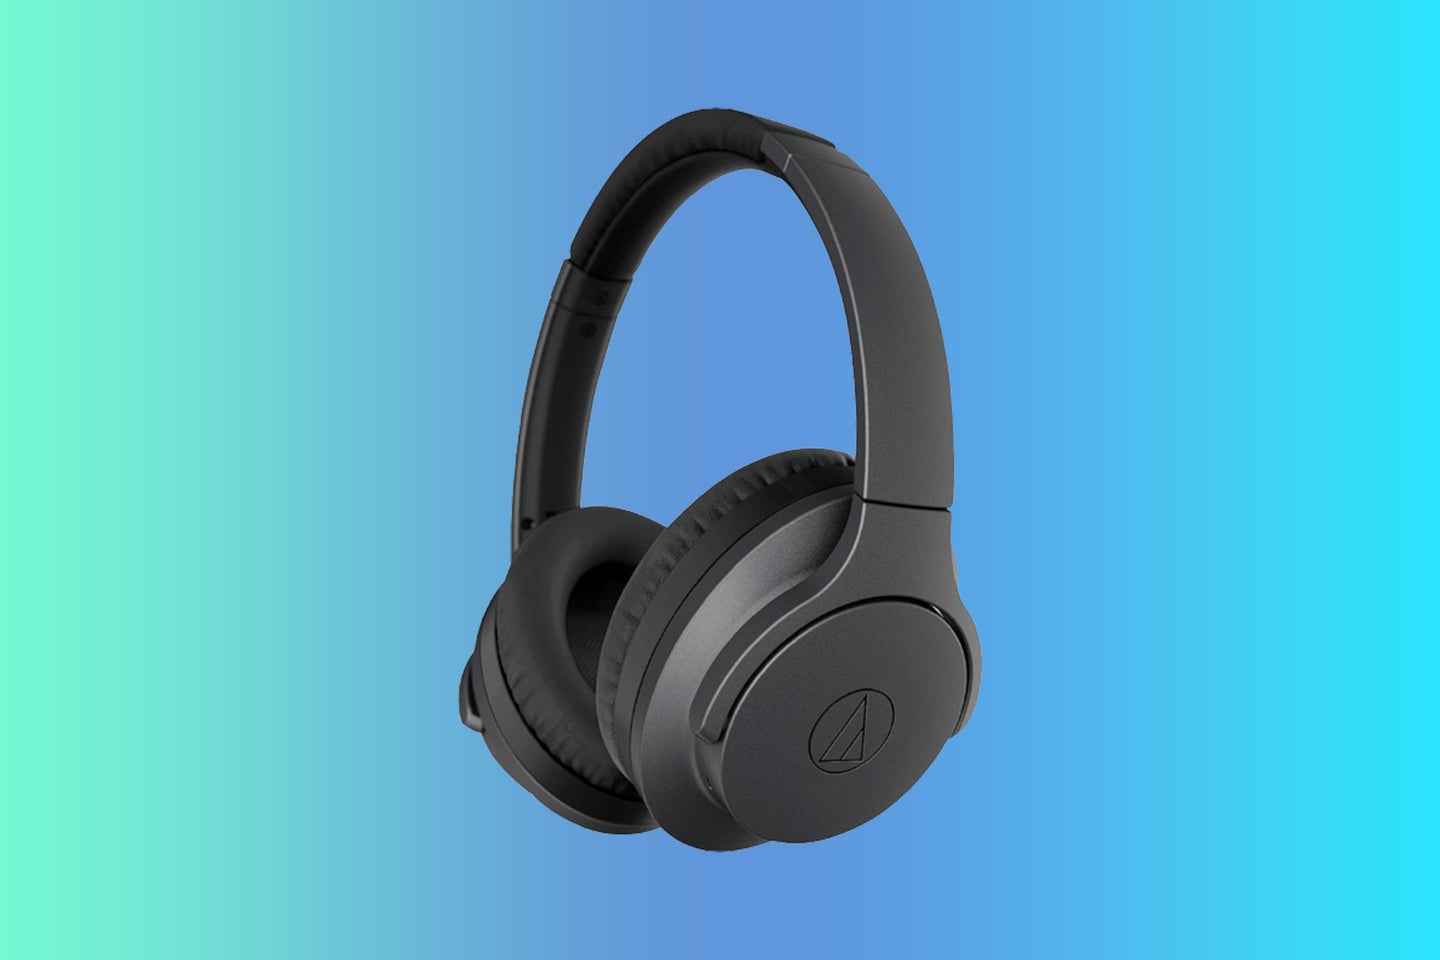 A pair of black wireless headphones on a blue gradient background